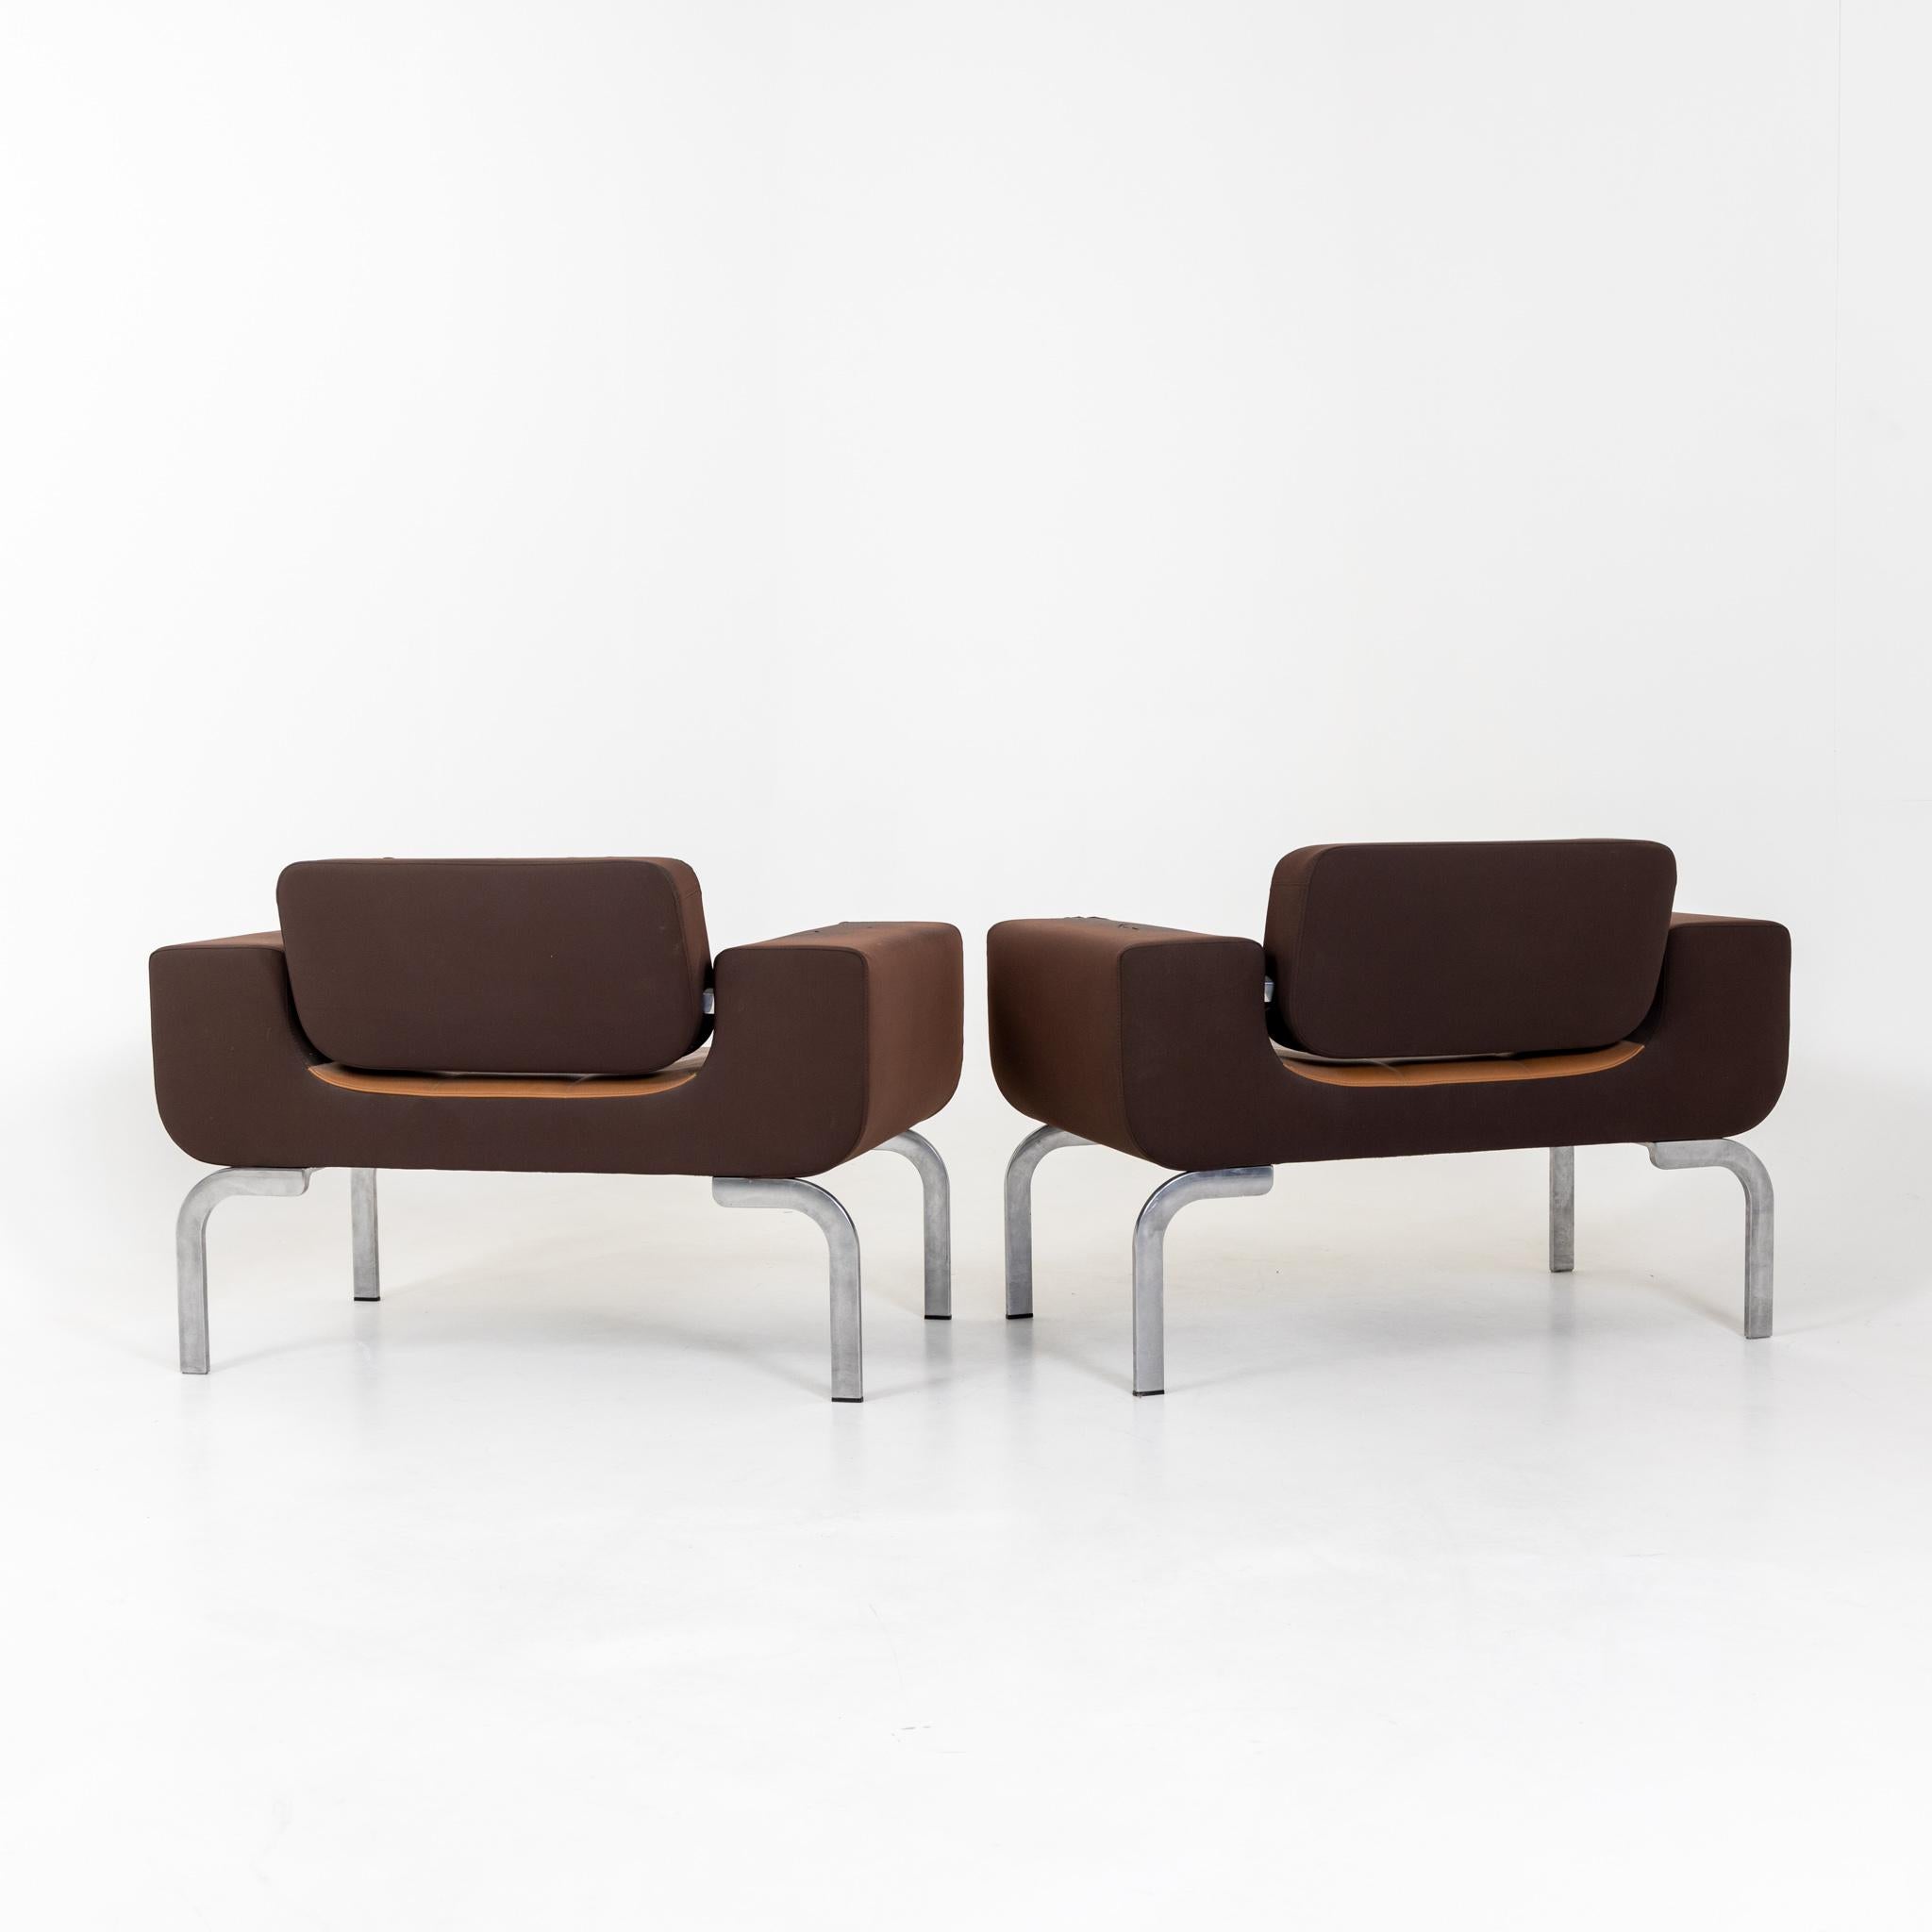 Pair of Brown Lounge Chairs, Fabric and Metal, Italy 1970s For Sale 2